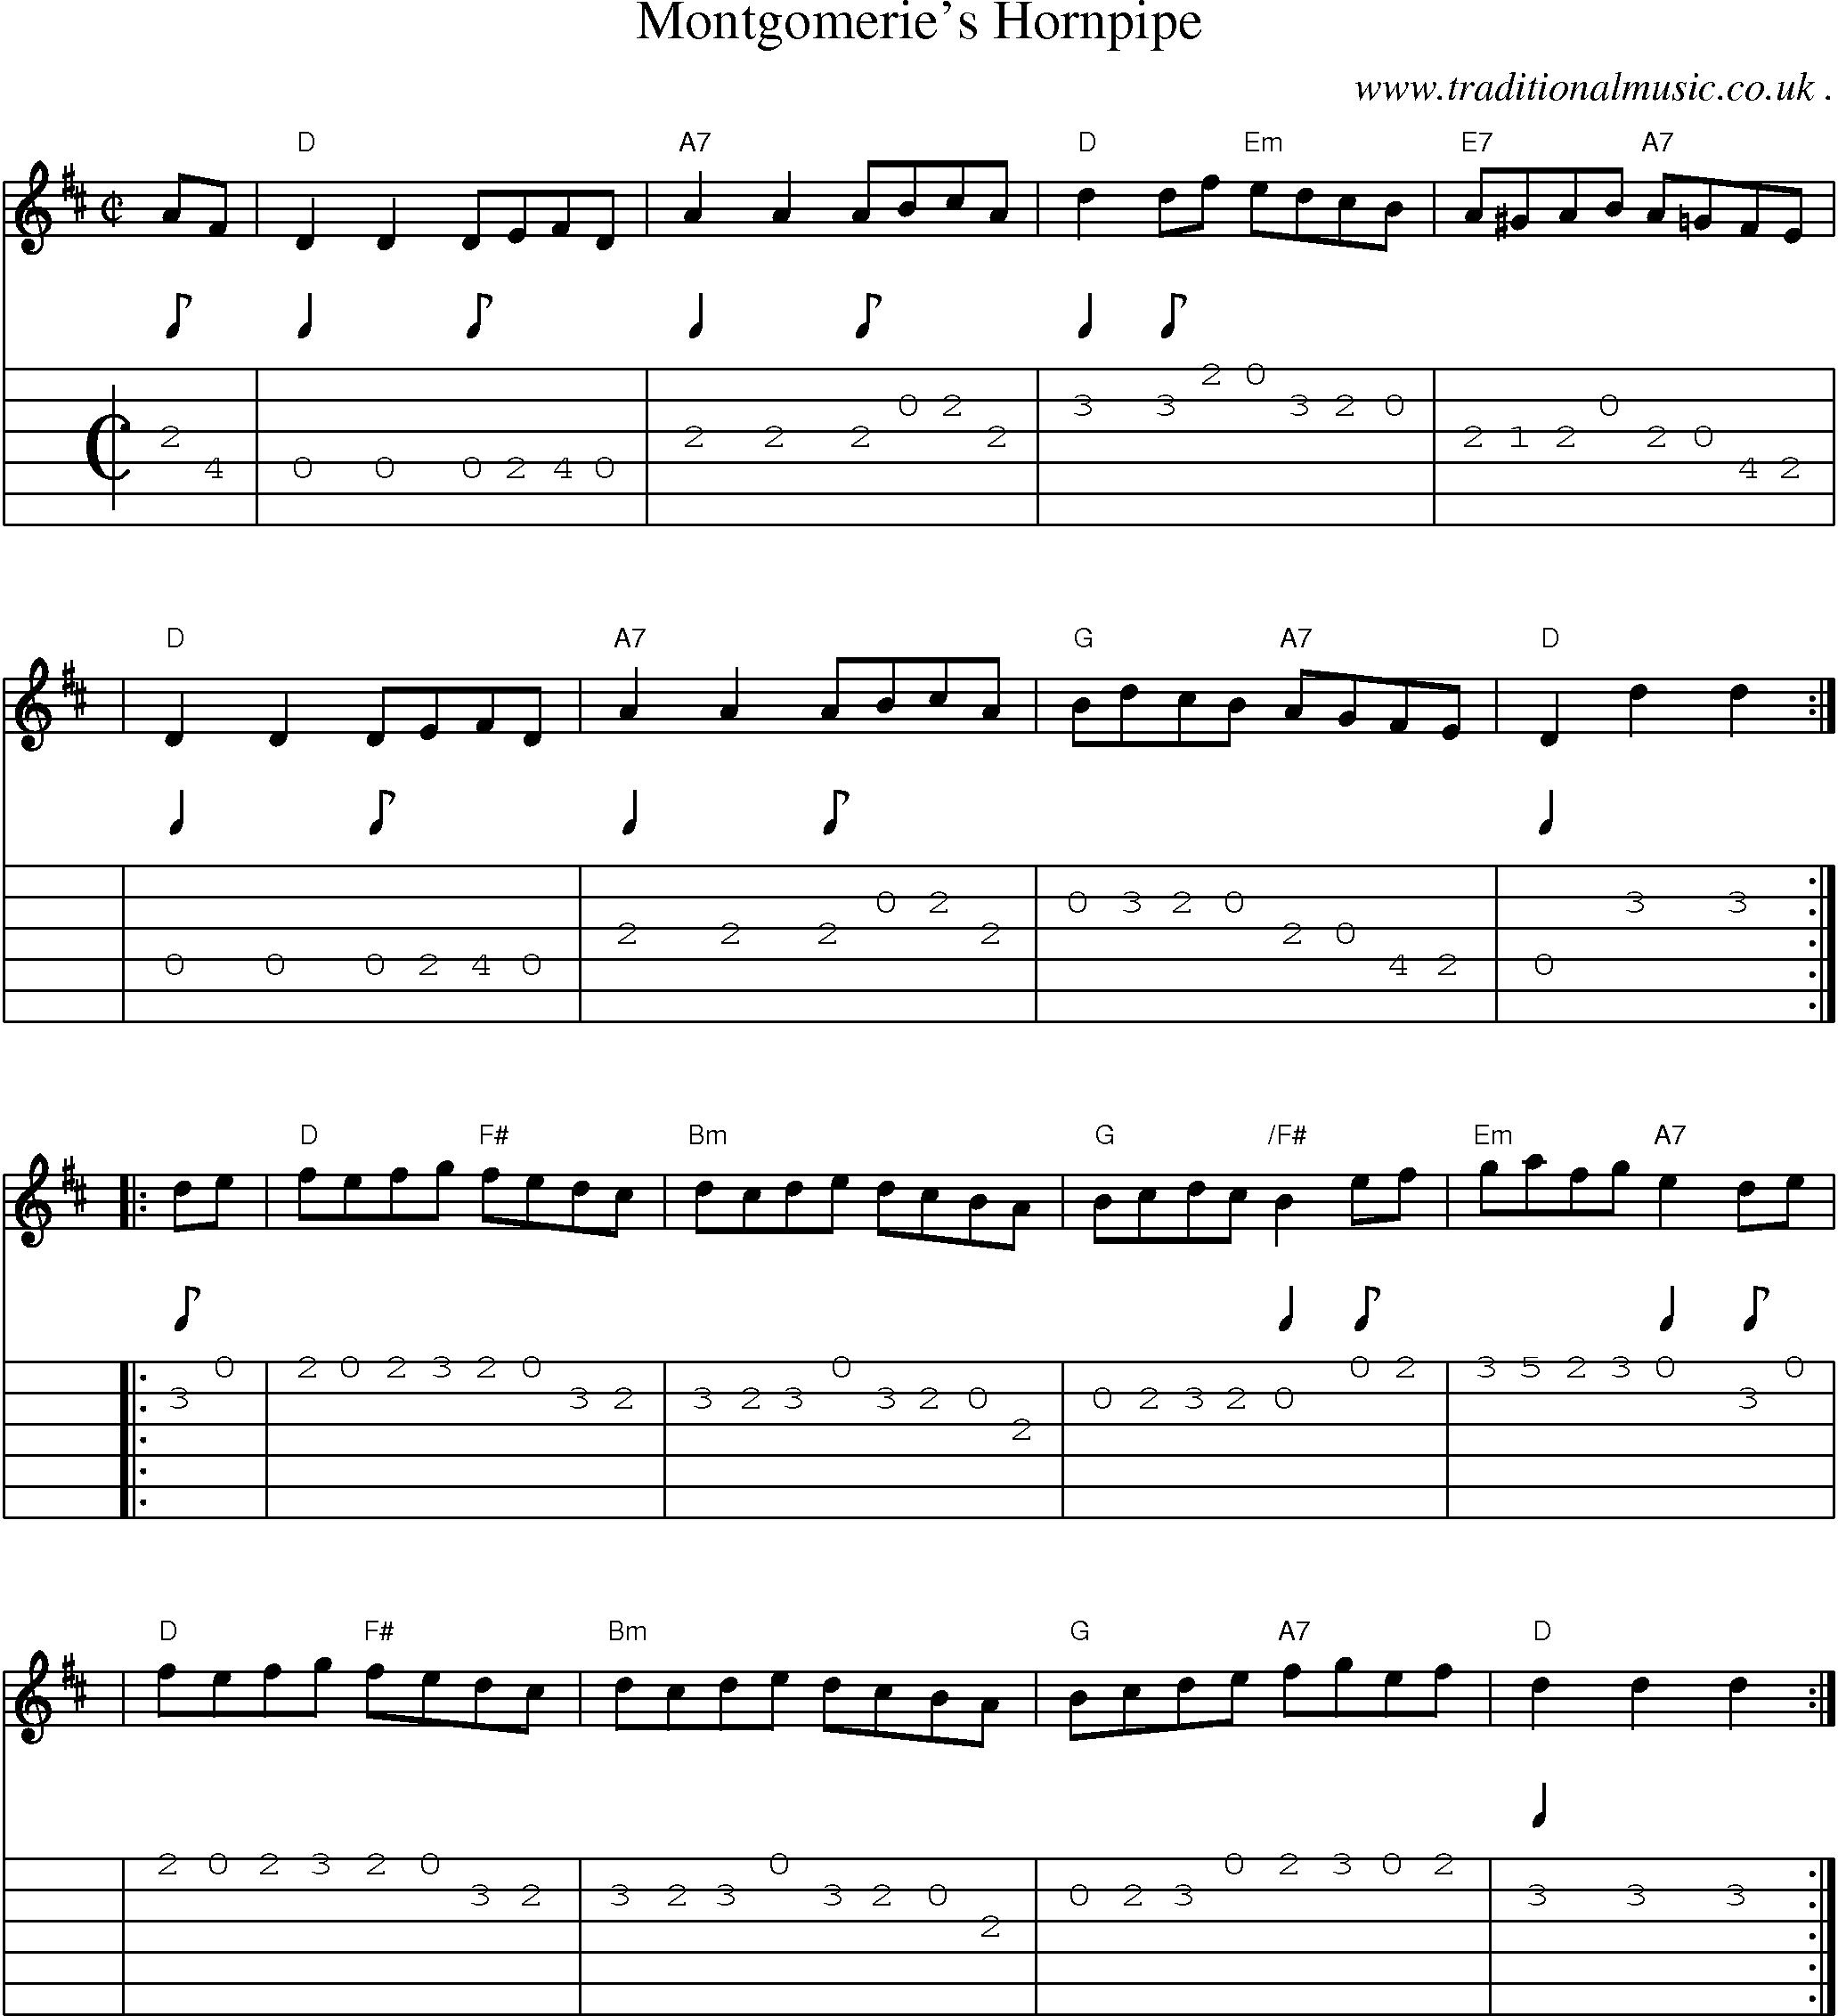 Sheet-music  score, Chords and Guitar Tabs for Montgomeries Hornpipe